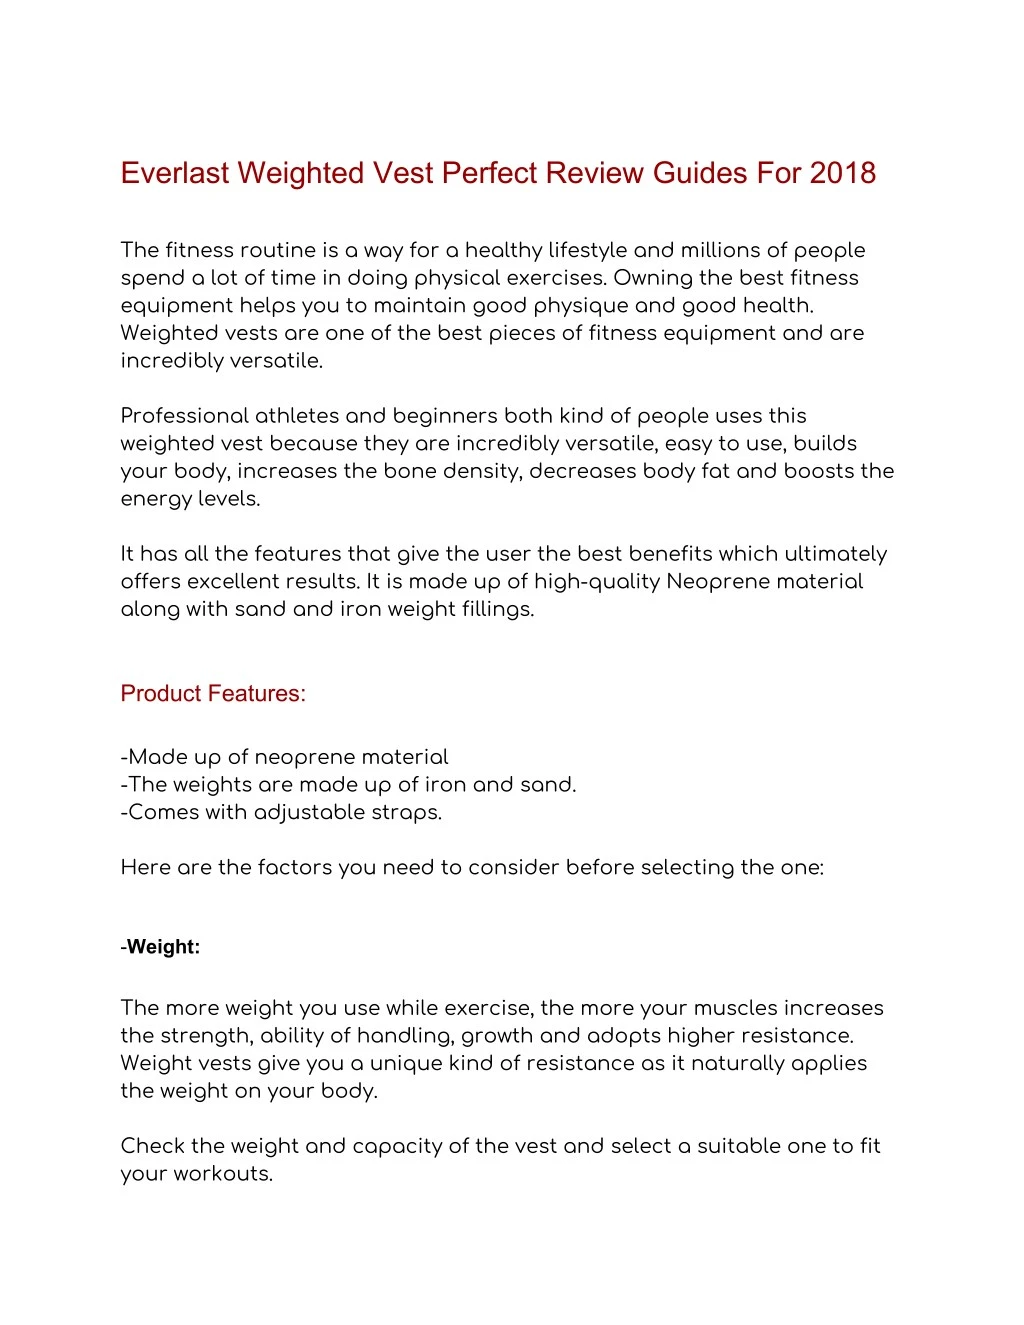 everlast weighted vest perfect review guides